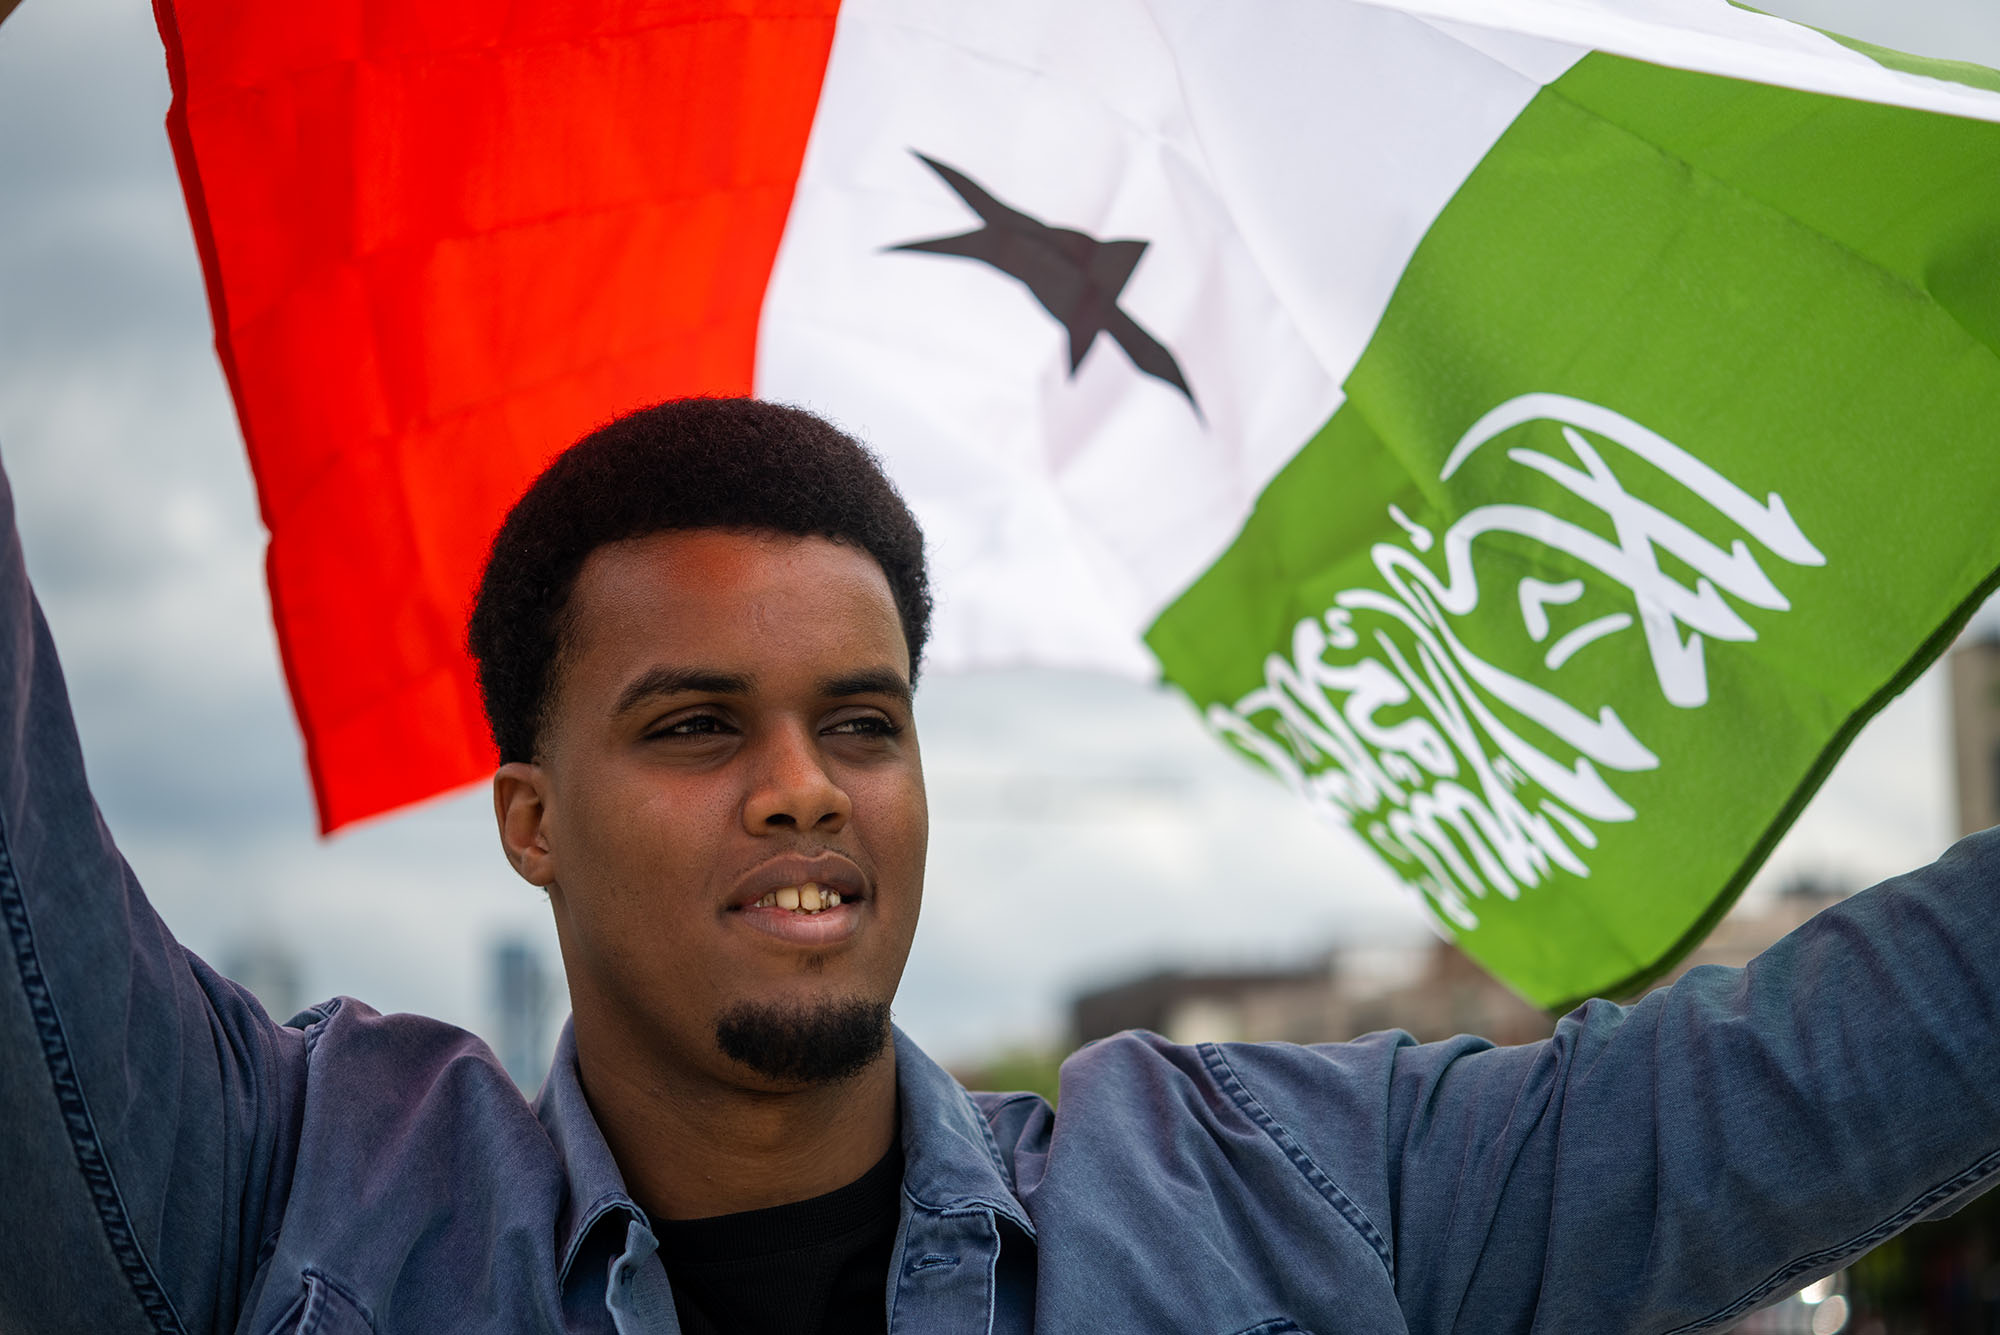 Photo: Zakariya Hussein, a dark-skinned Somalian young man wearing a black shirt and blue collared lone-sleeved shirt smiles and holds the Somaliland flag above his head. The flag blows behind him, creating a striking portrait.